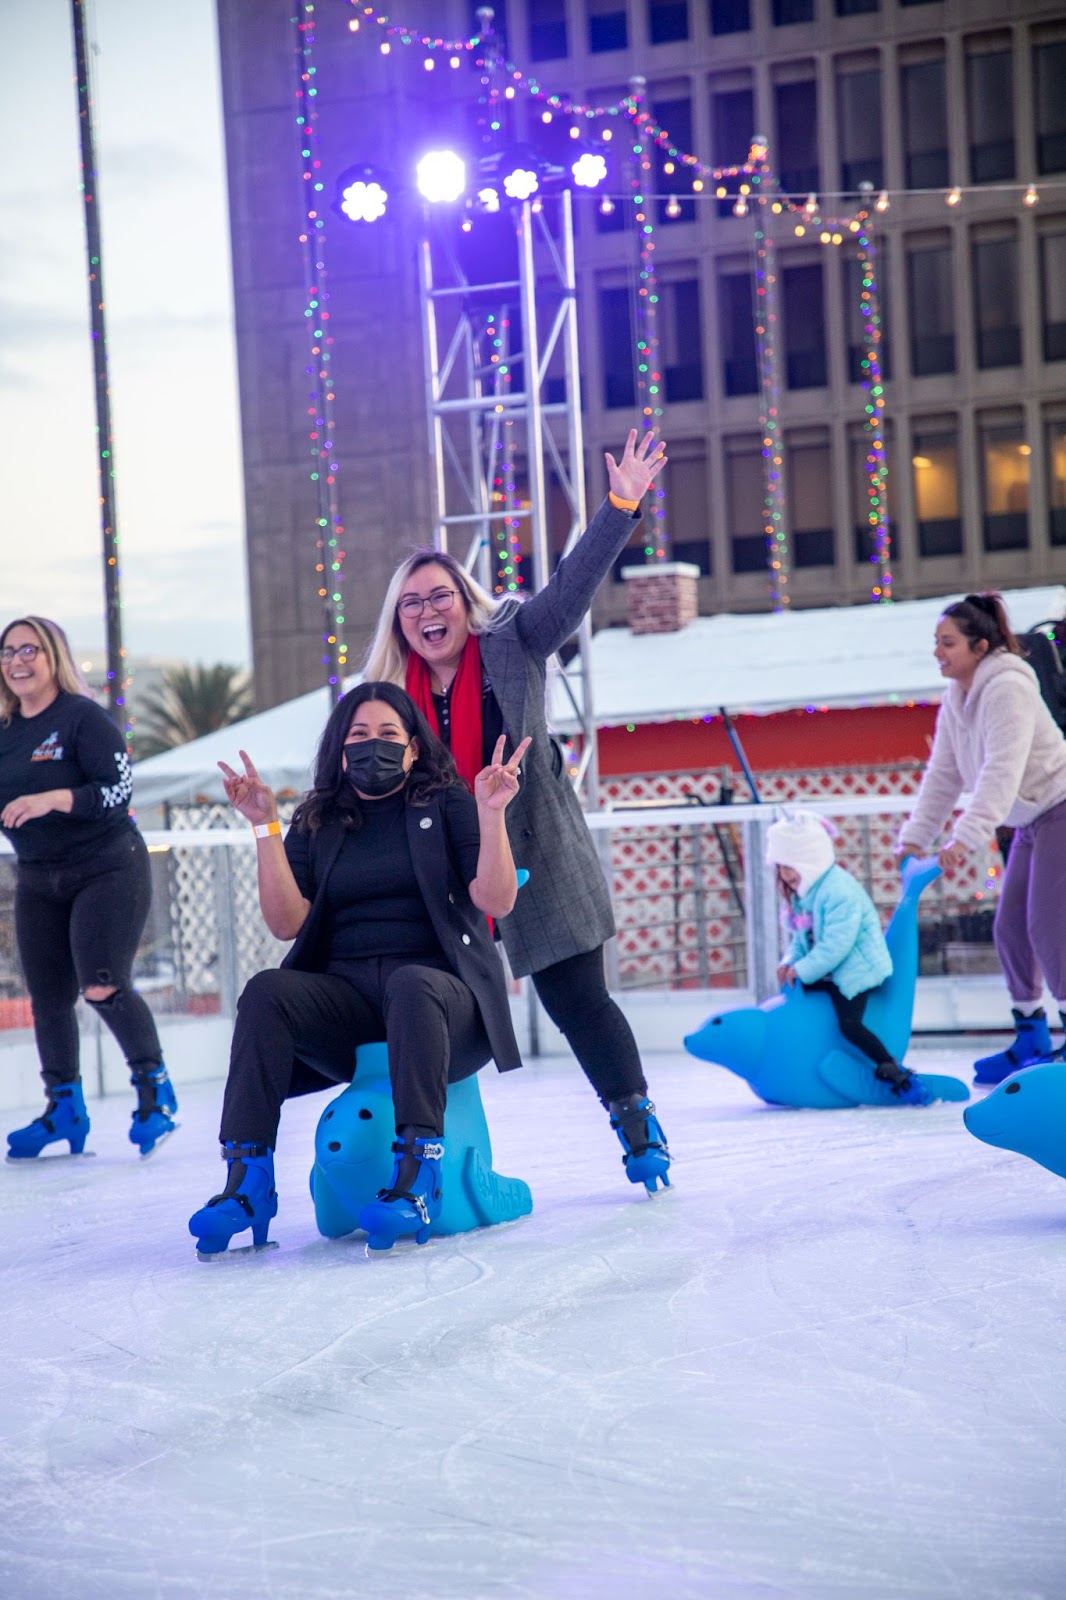 Councilmember Lopez and Phan pose on the ice at the winter village